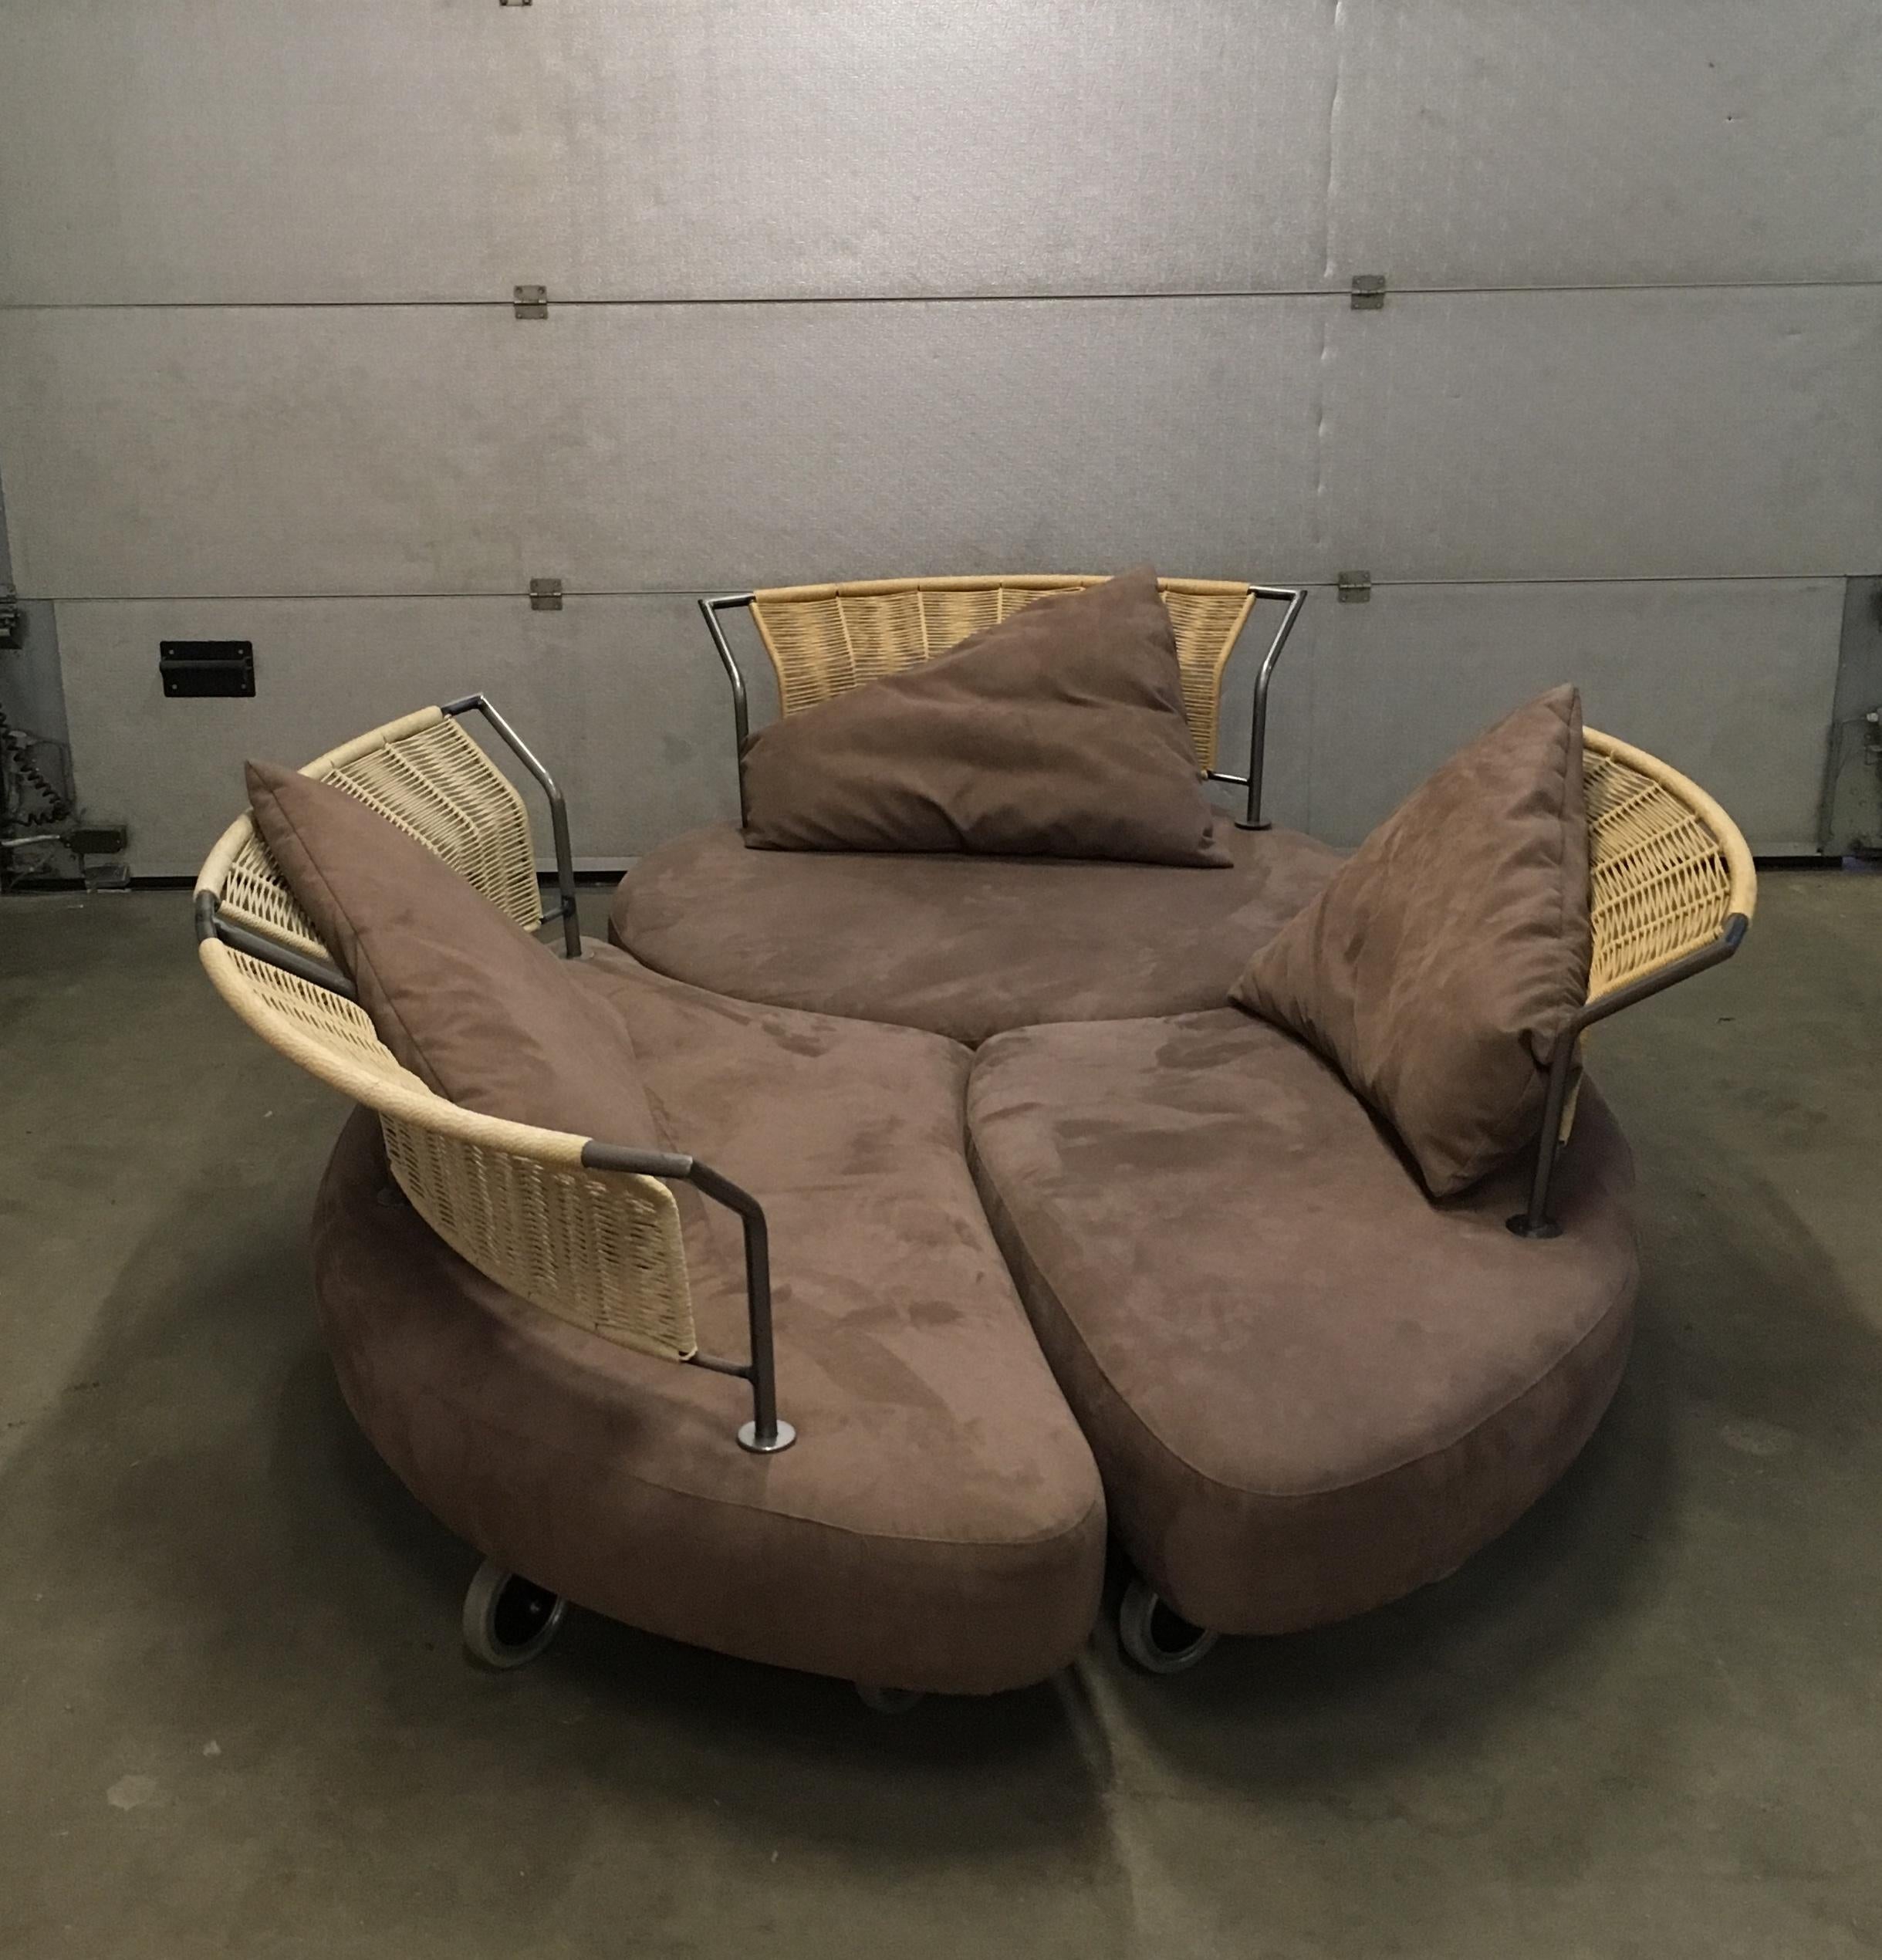 Large and rare sculptural piece from the 1980s,-1990s which can be easily turned into an 'island' or so called platform. Very romantic and highly fashionable piece with Suède like fabric. Remains in good condition with wear consistent with age and